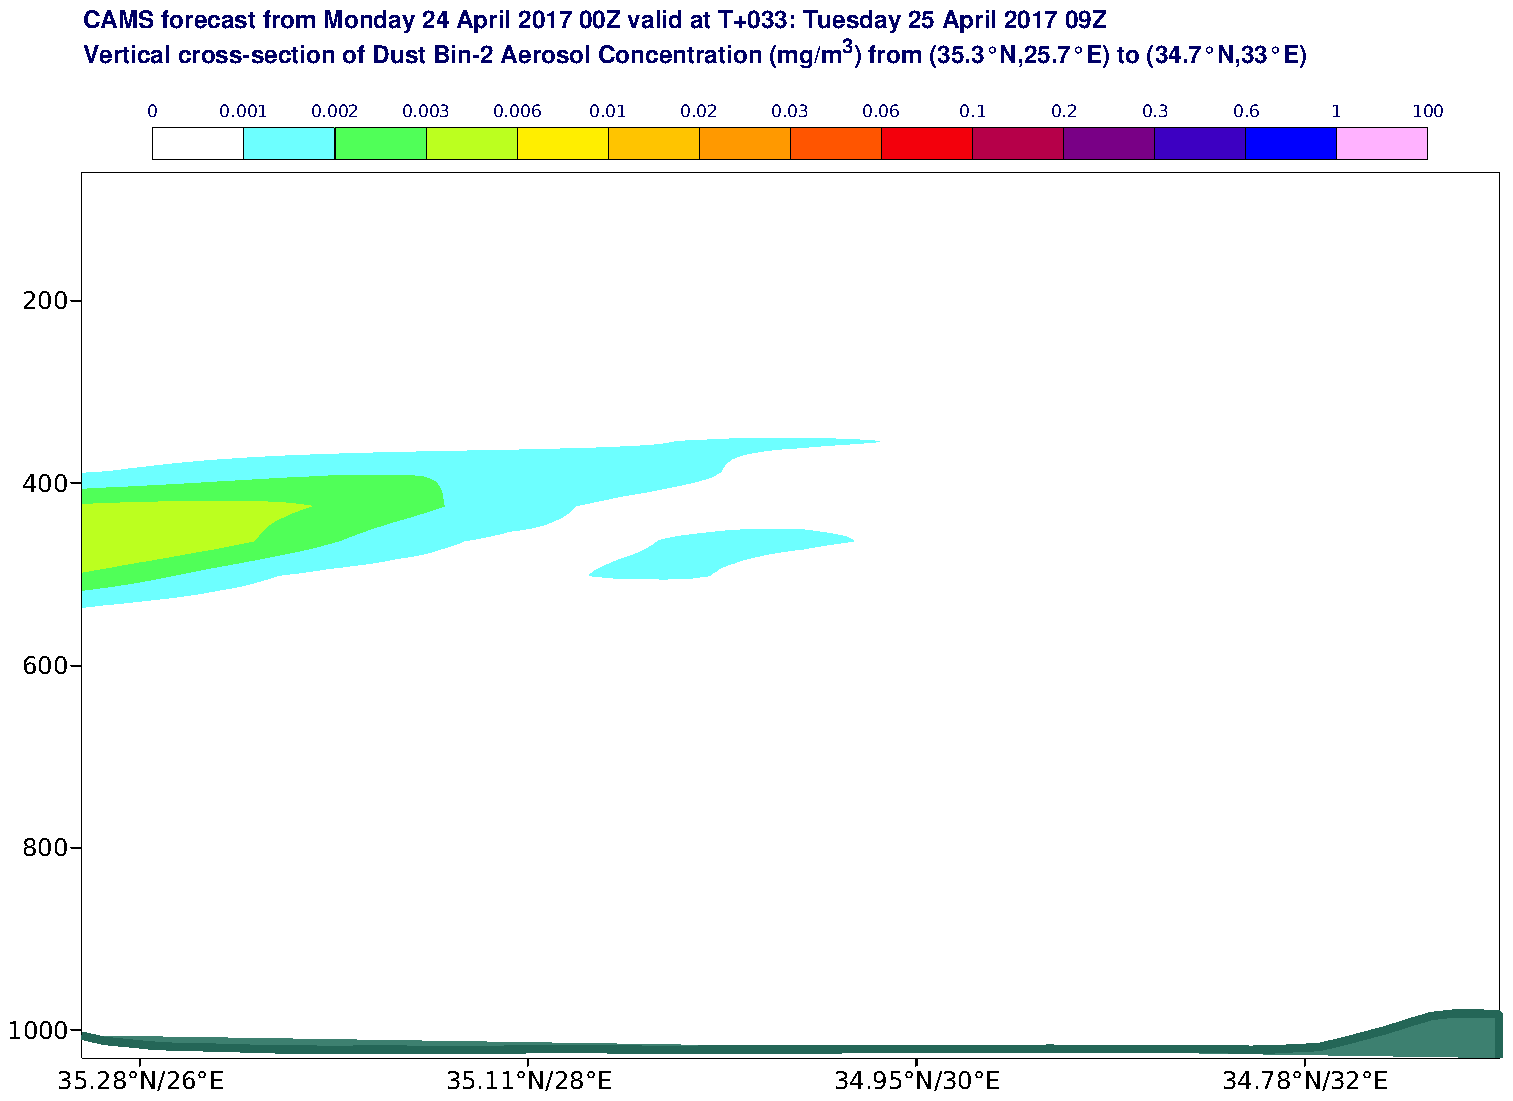 Vertical cross-section of Dust Bin-2 Aerosol Concentration (mg/m3) valid at T33 - 2017-04-25 09:00